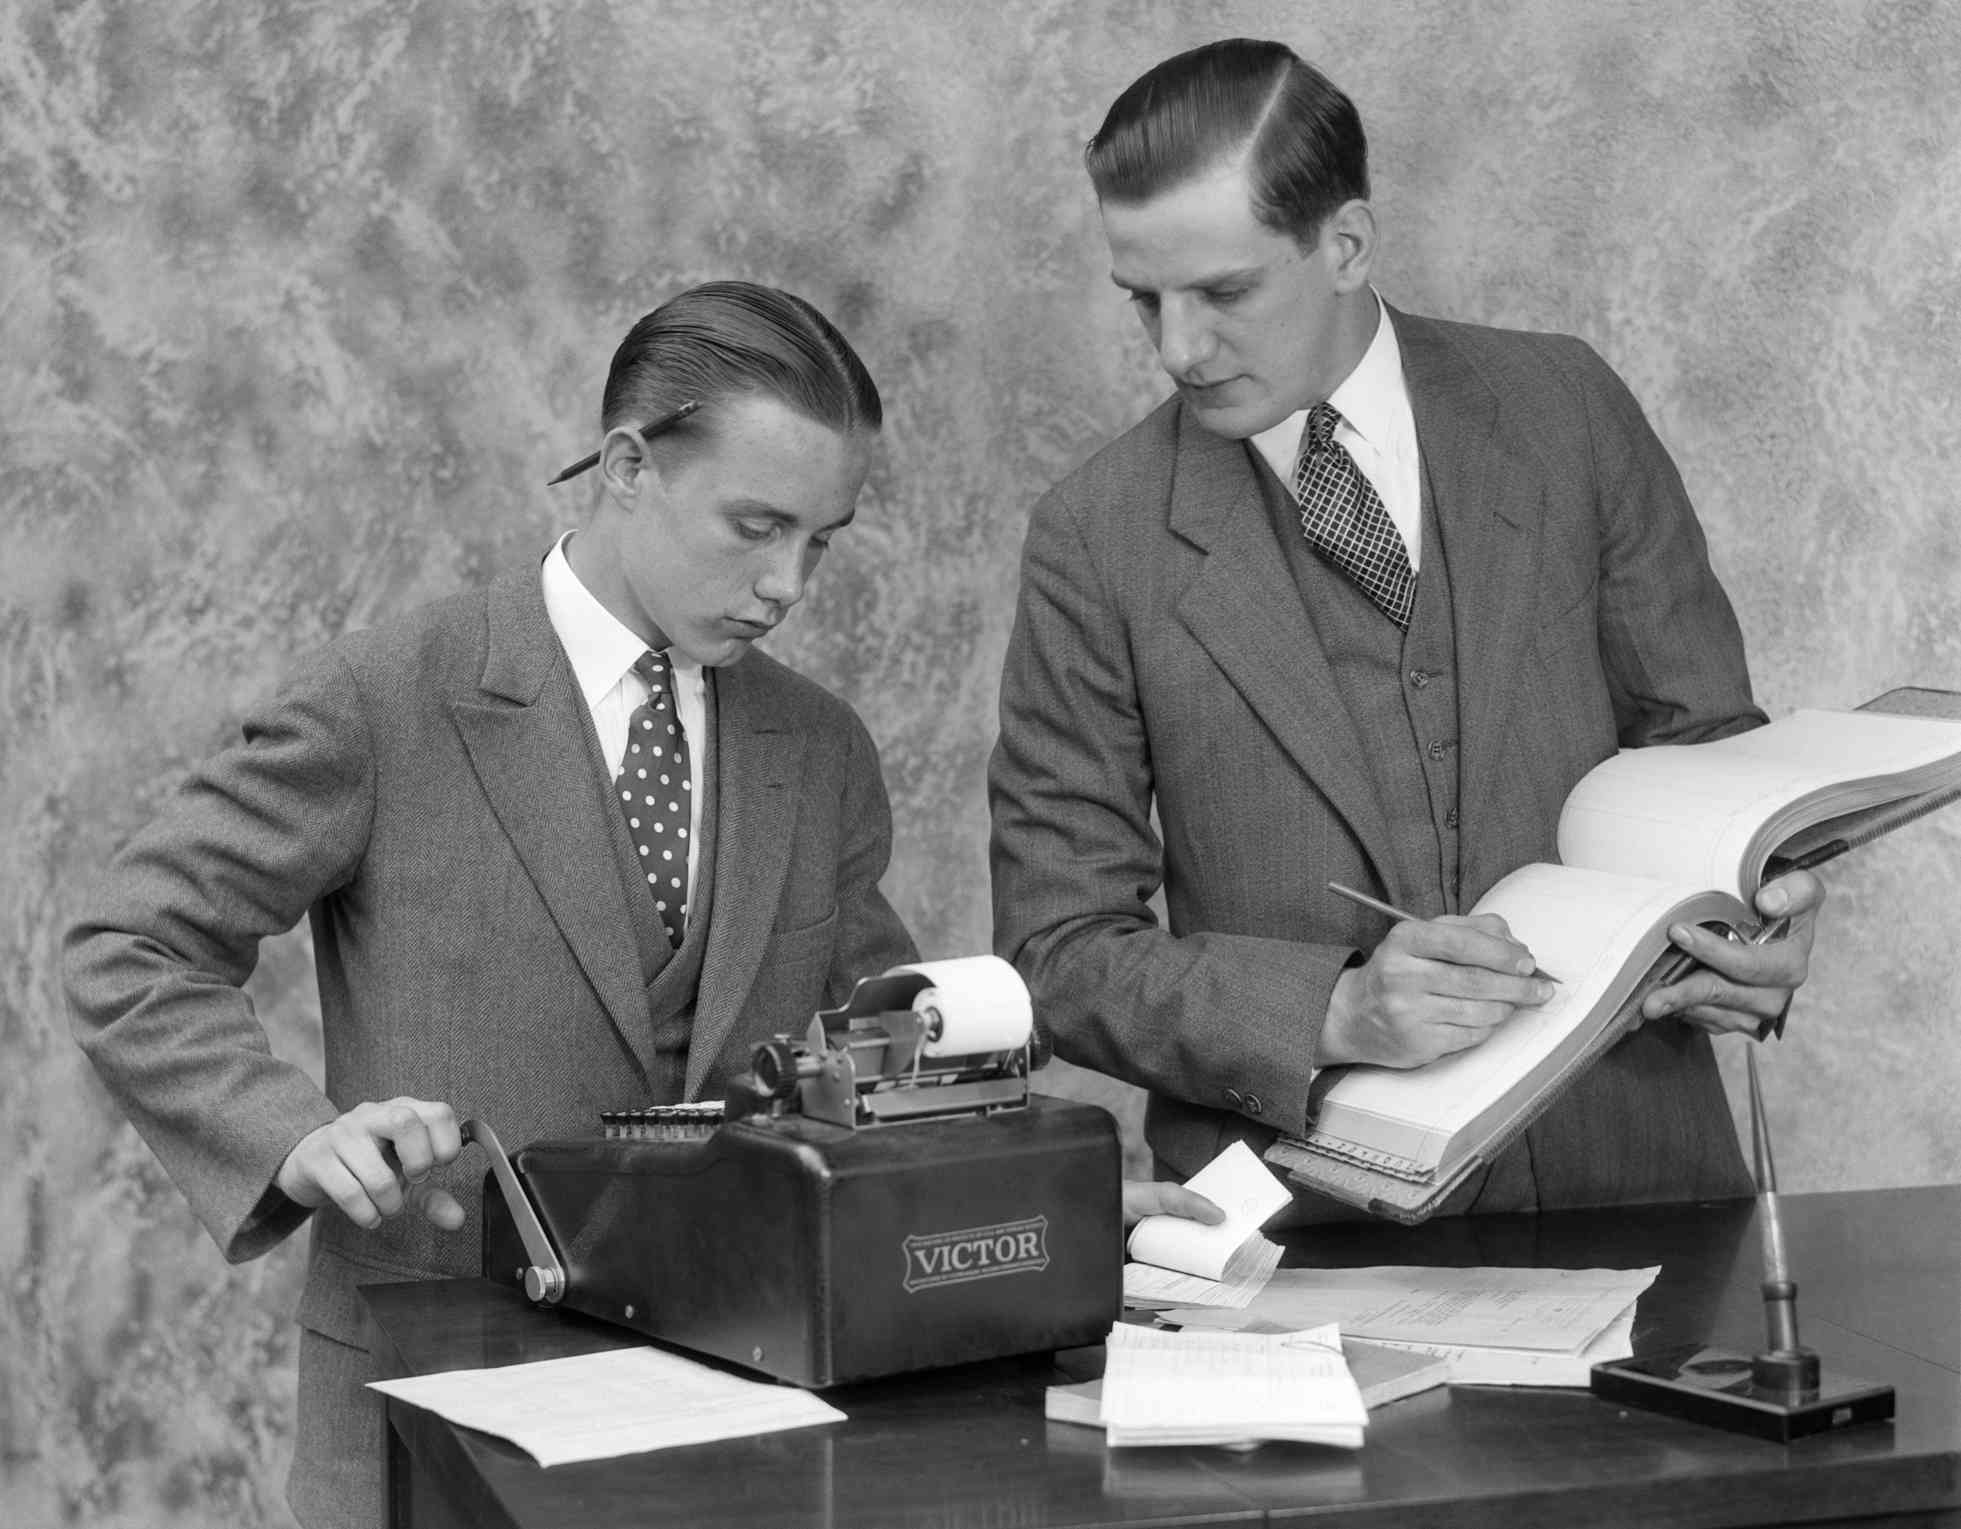 1920s Bookkeeper and assistant using a ledger book and manual adding machine, ClassicStock. The Balance. Web.